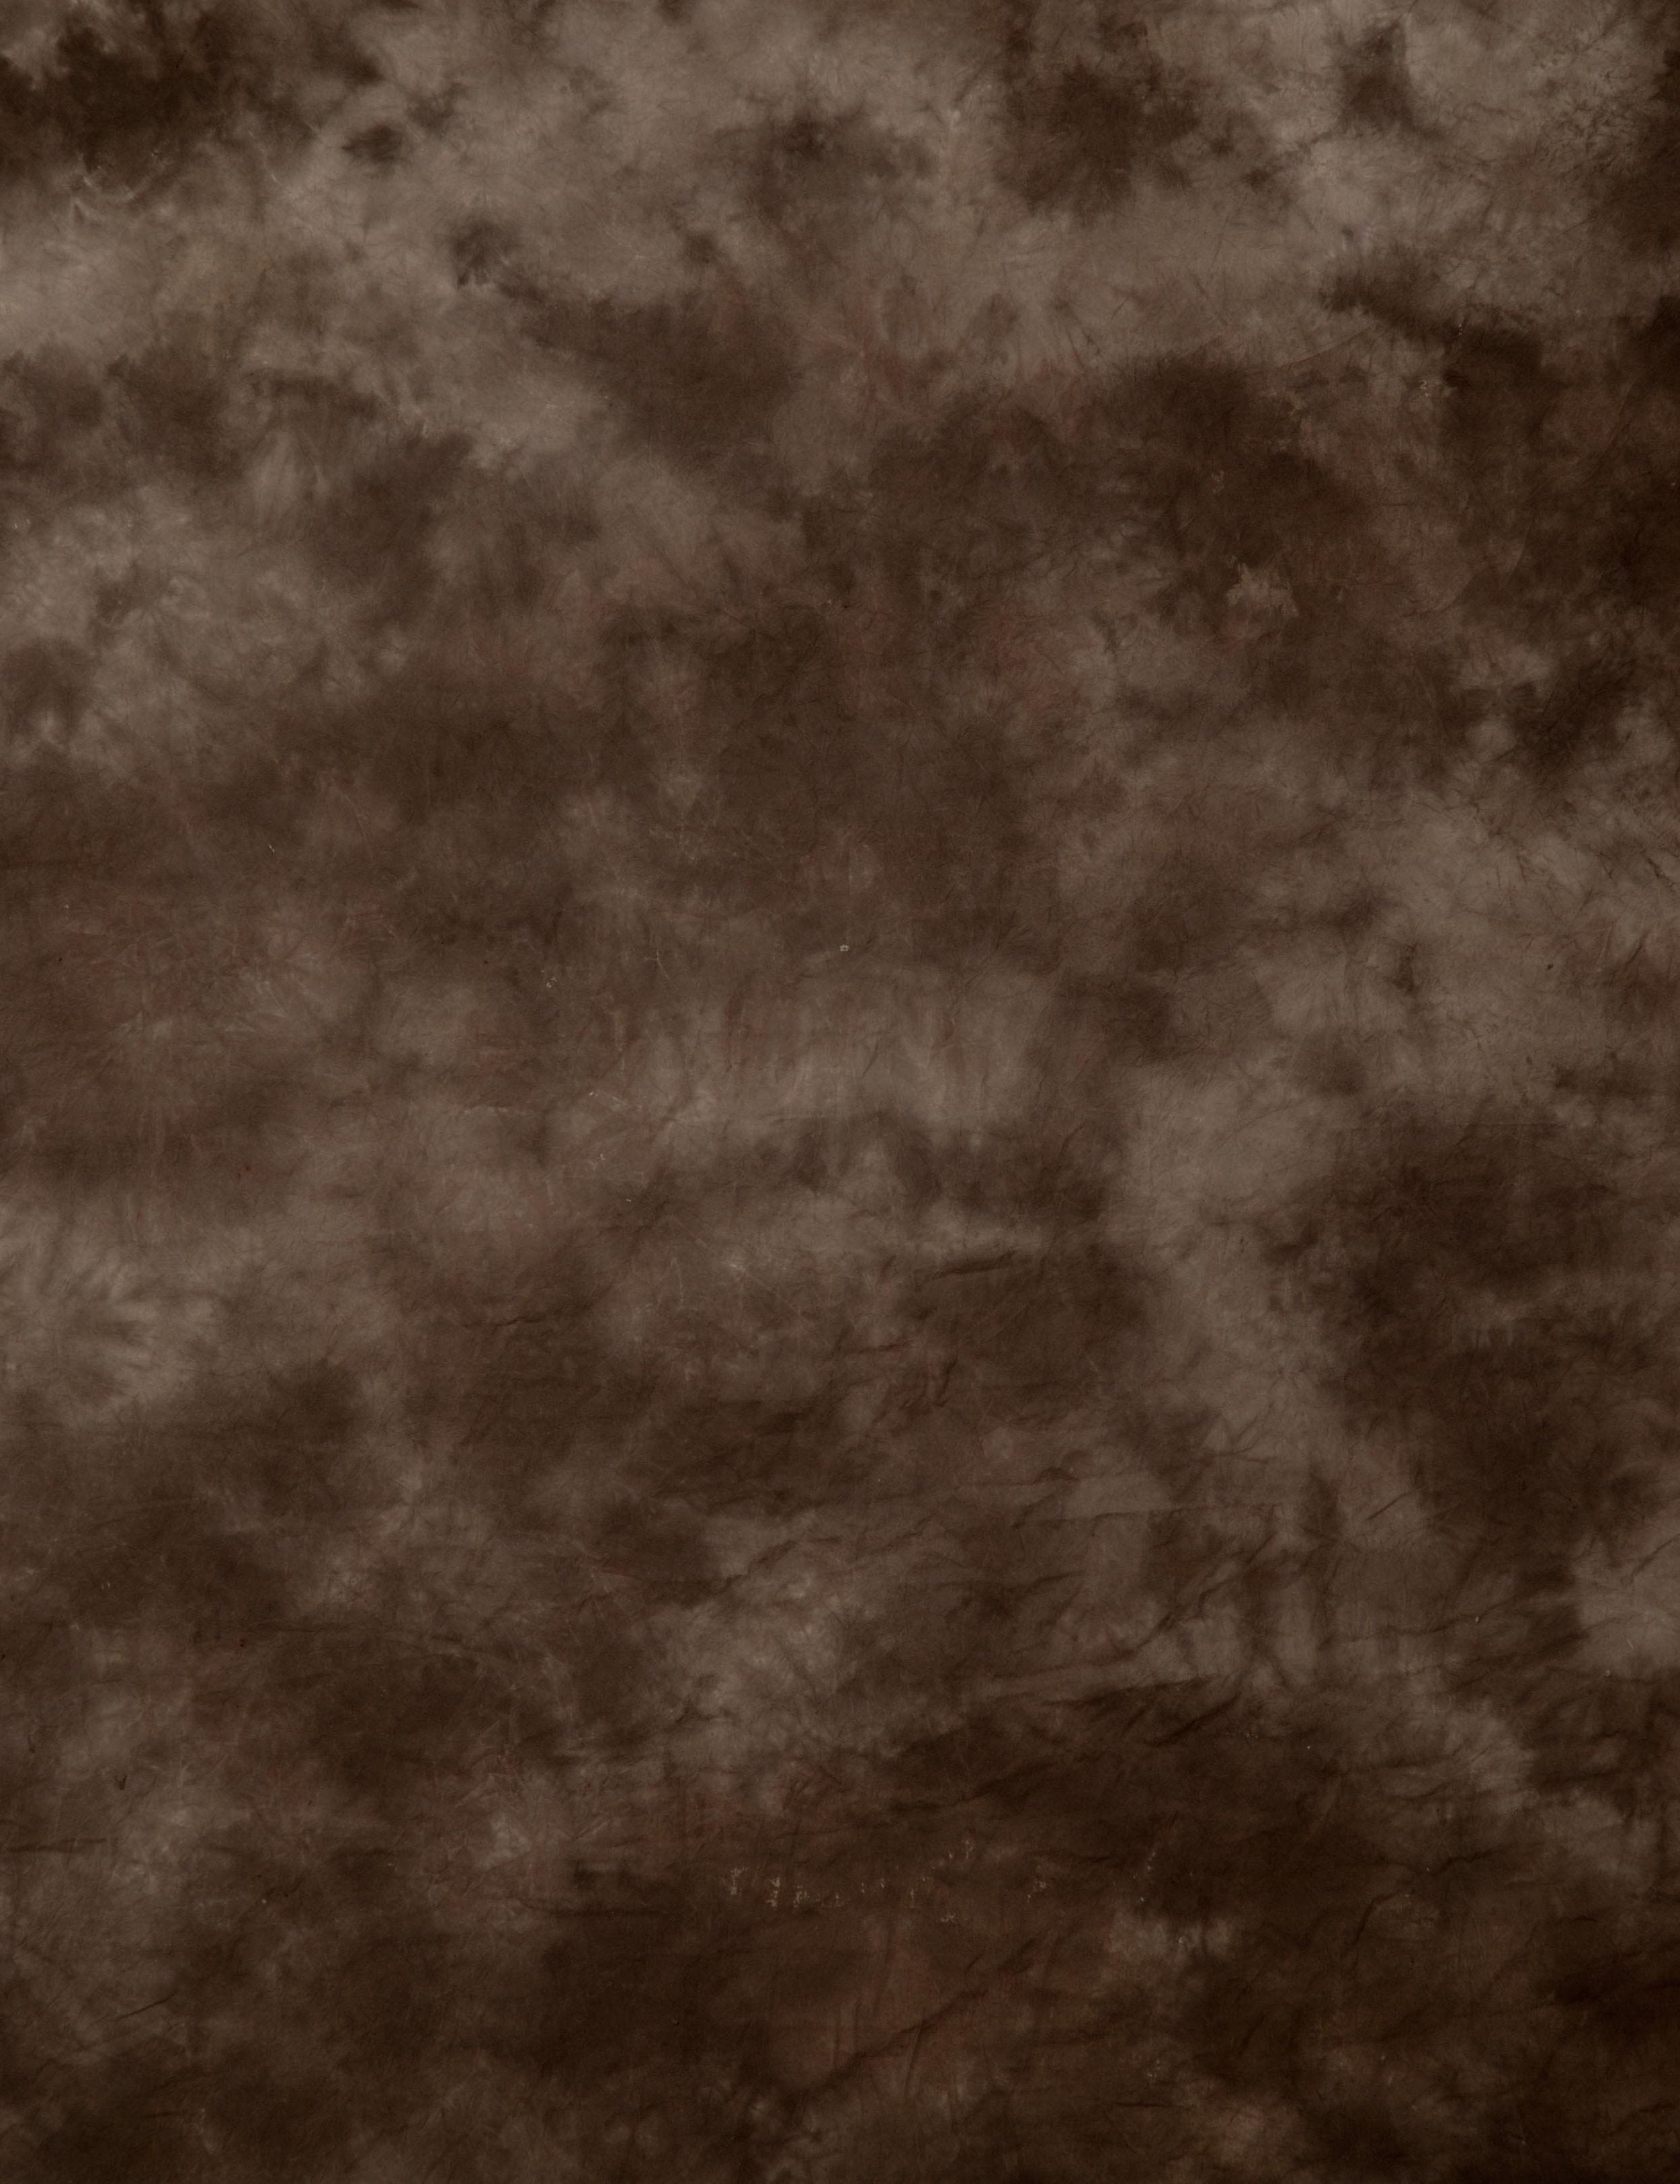 Old Master Printed Brown and Grey Texture Like Oil Painting Backdrop for Photography Shopbackdrop